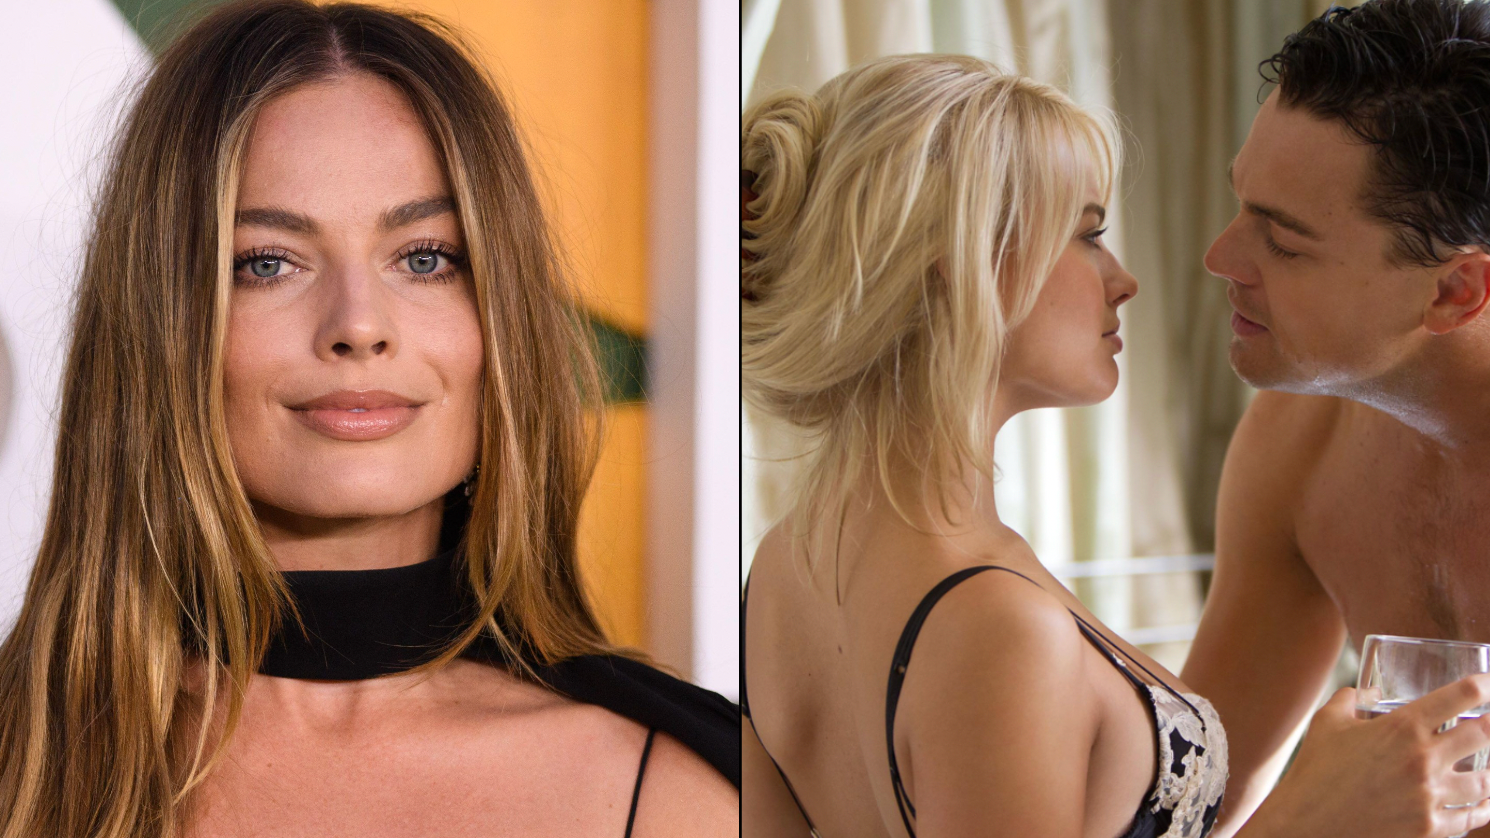 chris capezza recommends margot robbie boobs pic